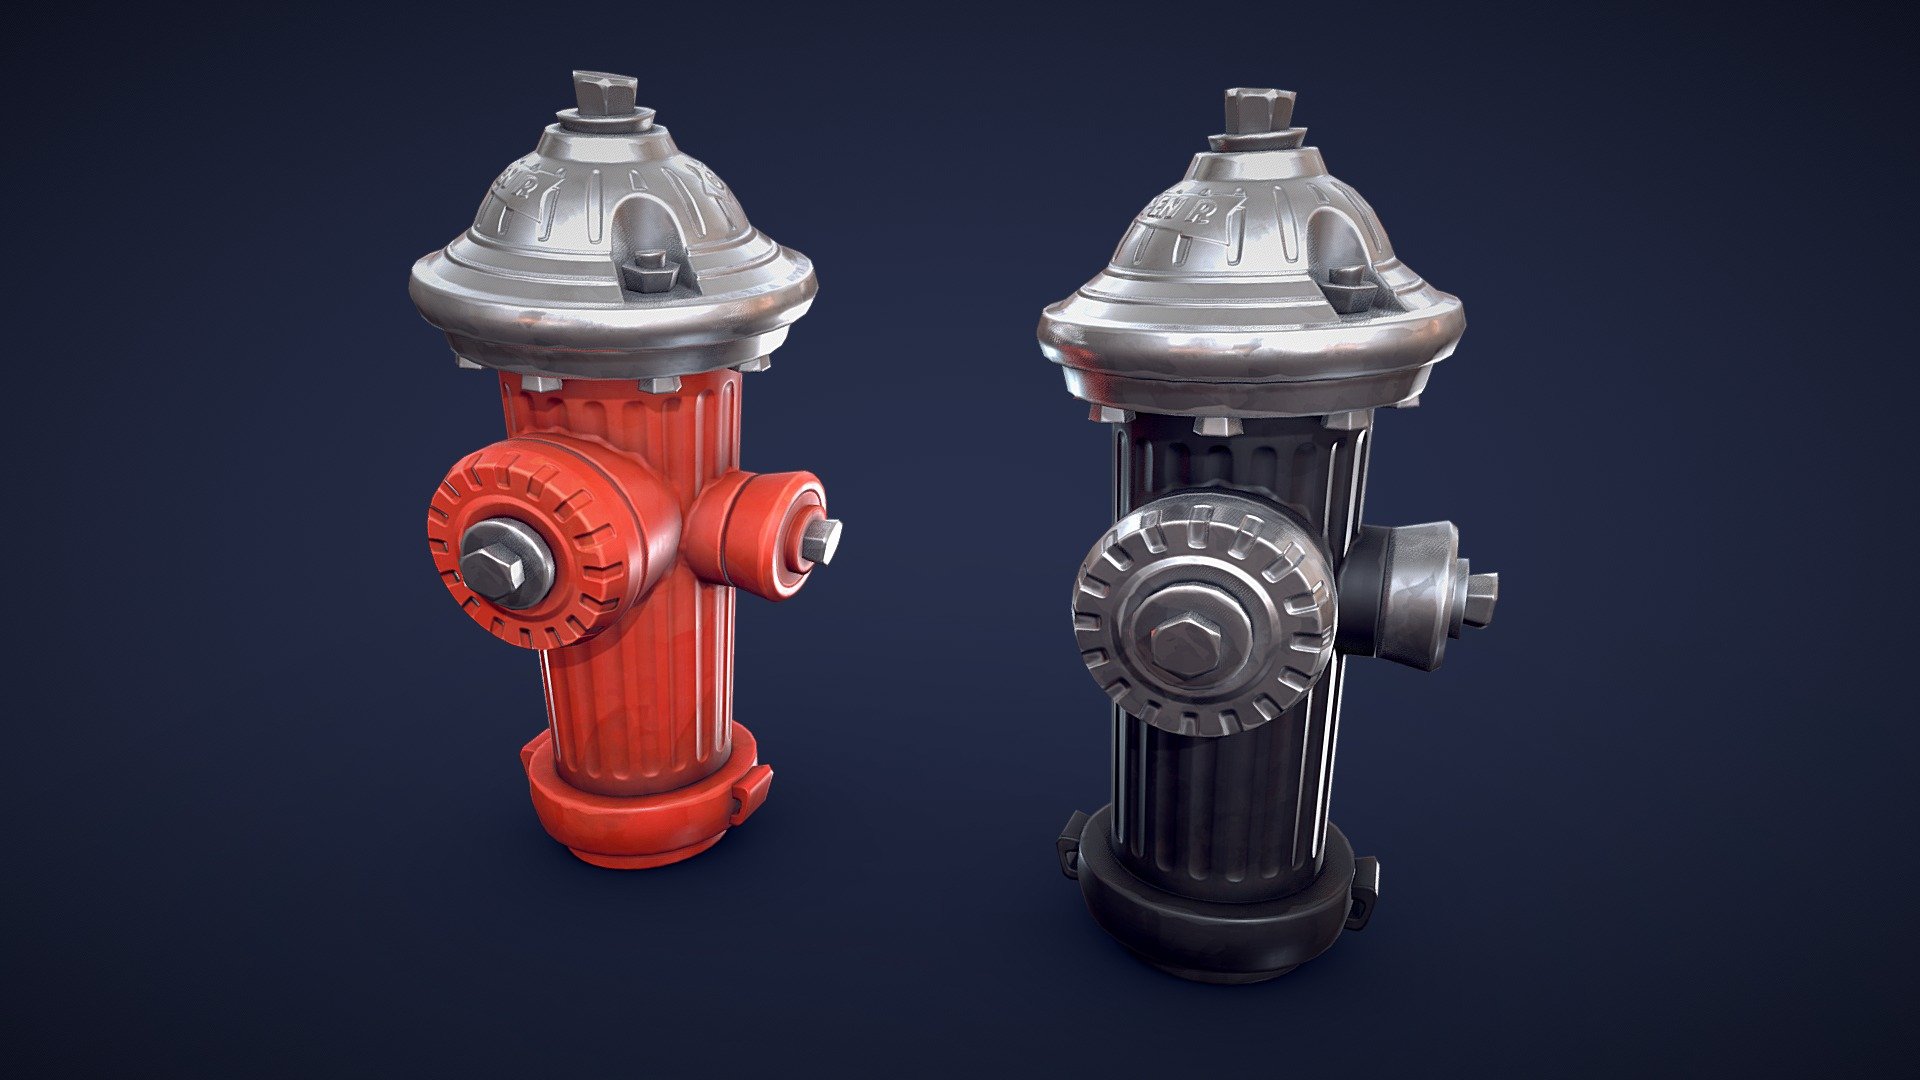 This stylized fire hydrant model pack is featuring two different models and textures: red and black. Whether you want to create a modern urban city scene or a post-apocalyptic wasteland, this stylized fire hydrant model will add some personality and detail to your project.

Model information:




Optimized low-poly assets for real-time usage.

2K and 4K pbr textures are included.

2 color variation textures are included (red and black).

Optimized and clean UV mapping.

Compatible with Unreal Engine, Unity and similar engines.

All assets are included in a separate file as well.
 - Stylized Fire Hydrant - Low Poly - Buy Royalty Free 3D model by Lars Korden (@Lark.Art) 3d model